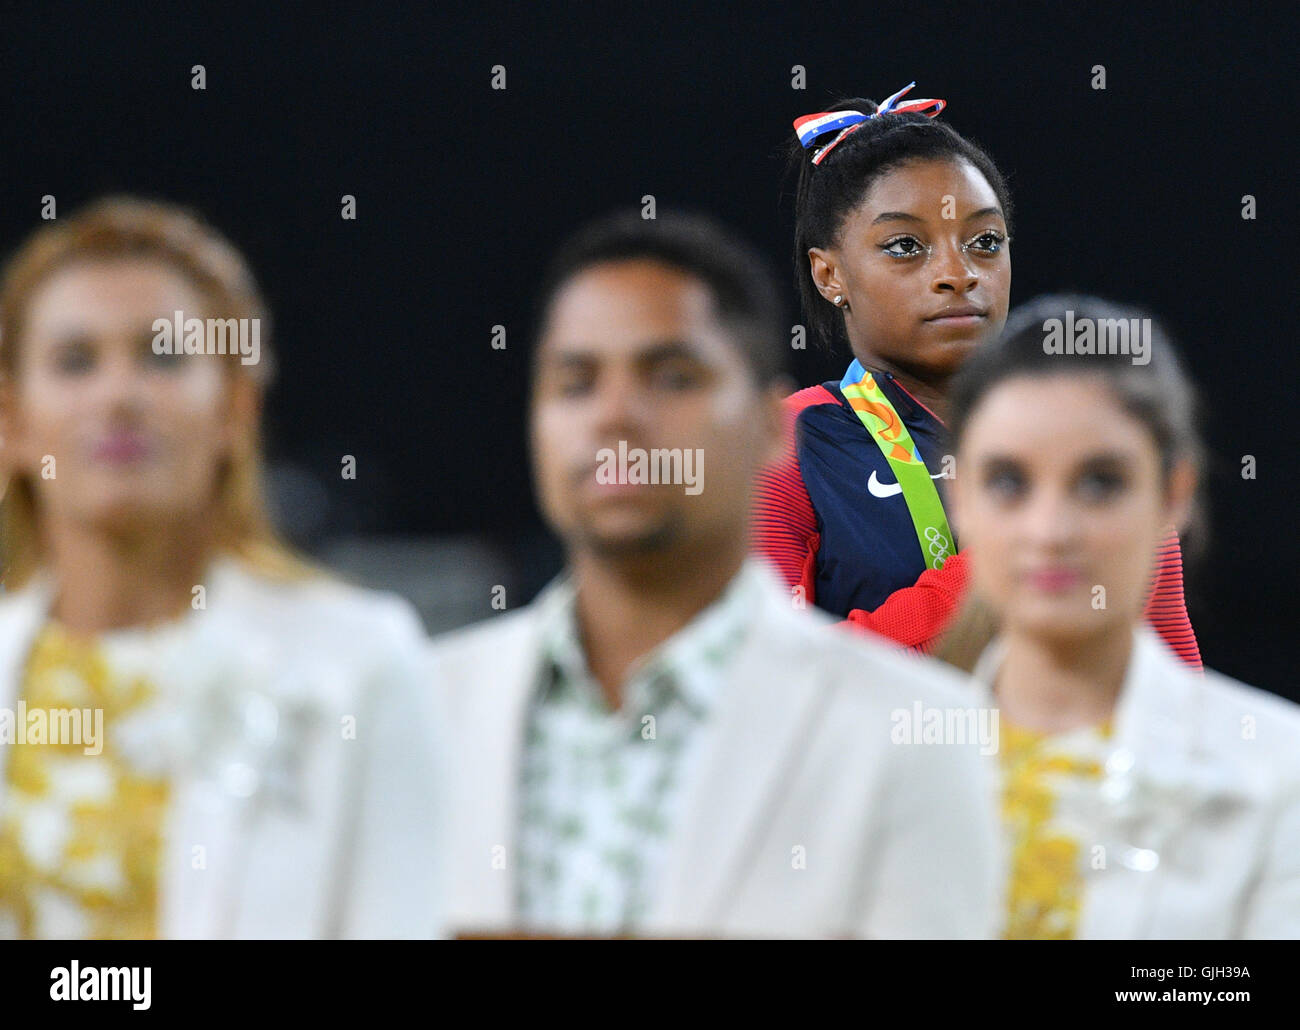 Rio de Janeiro, Brazil. 16th Aug, 2016. Simone Biles of the USA displays her Gold medal after the Women's Floor Exercise Final at the Artistic Gymnastics events of the Rio 2016 Olympic Games at the Rio Olympic Arena in Rio de Janeiro, Brazil, 16 August 2016. Photo: Lukas Schulze/dpa/Alamy Live News Stock Photo